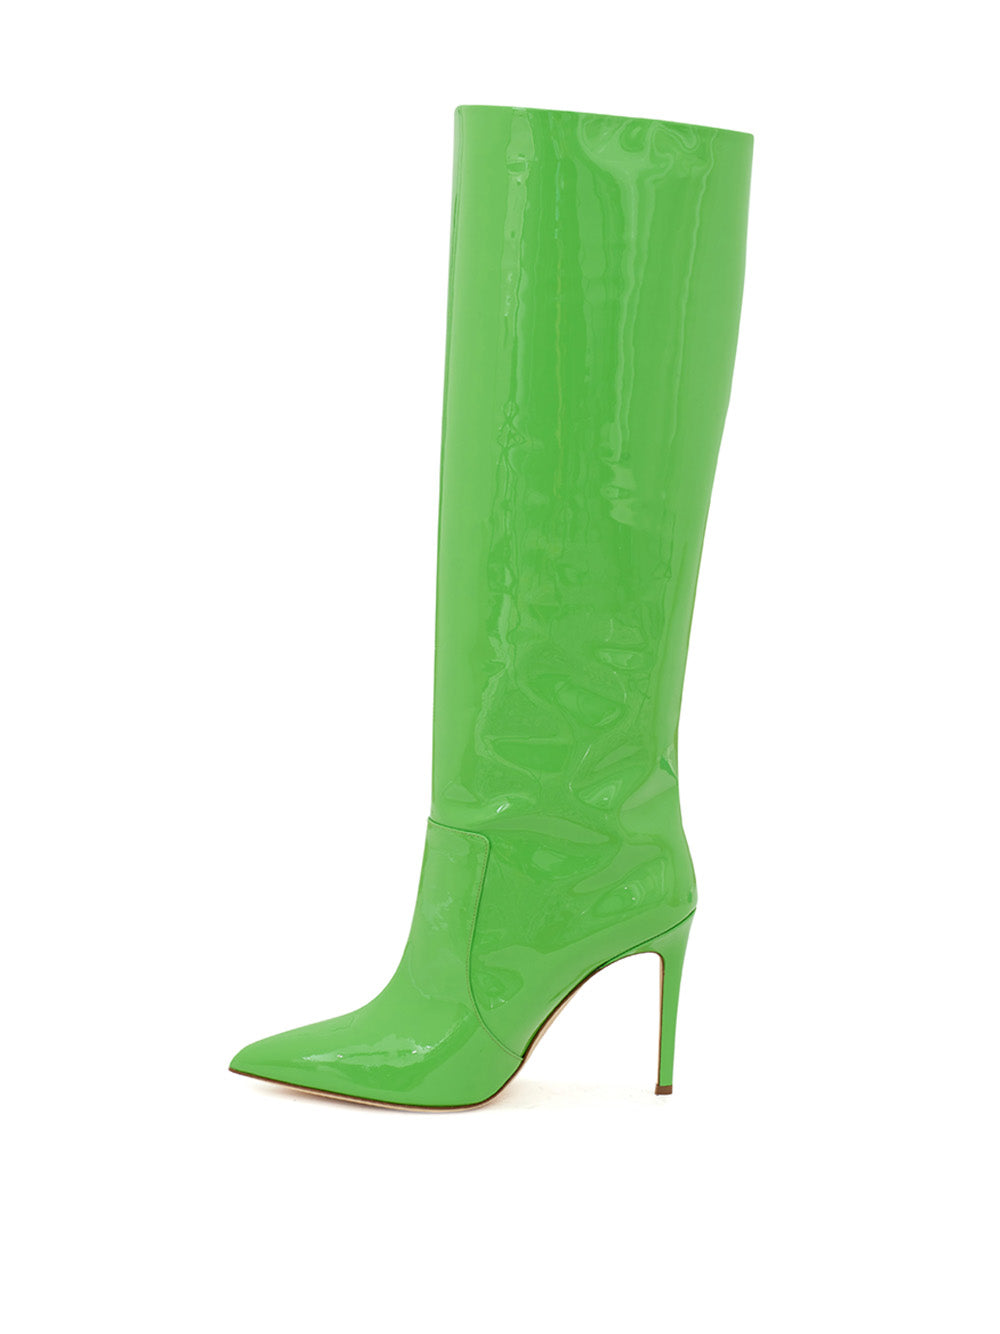 Paris Texas Green Patent Leather Boot - clever alice